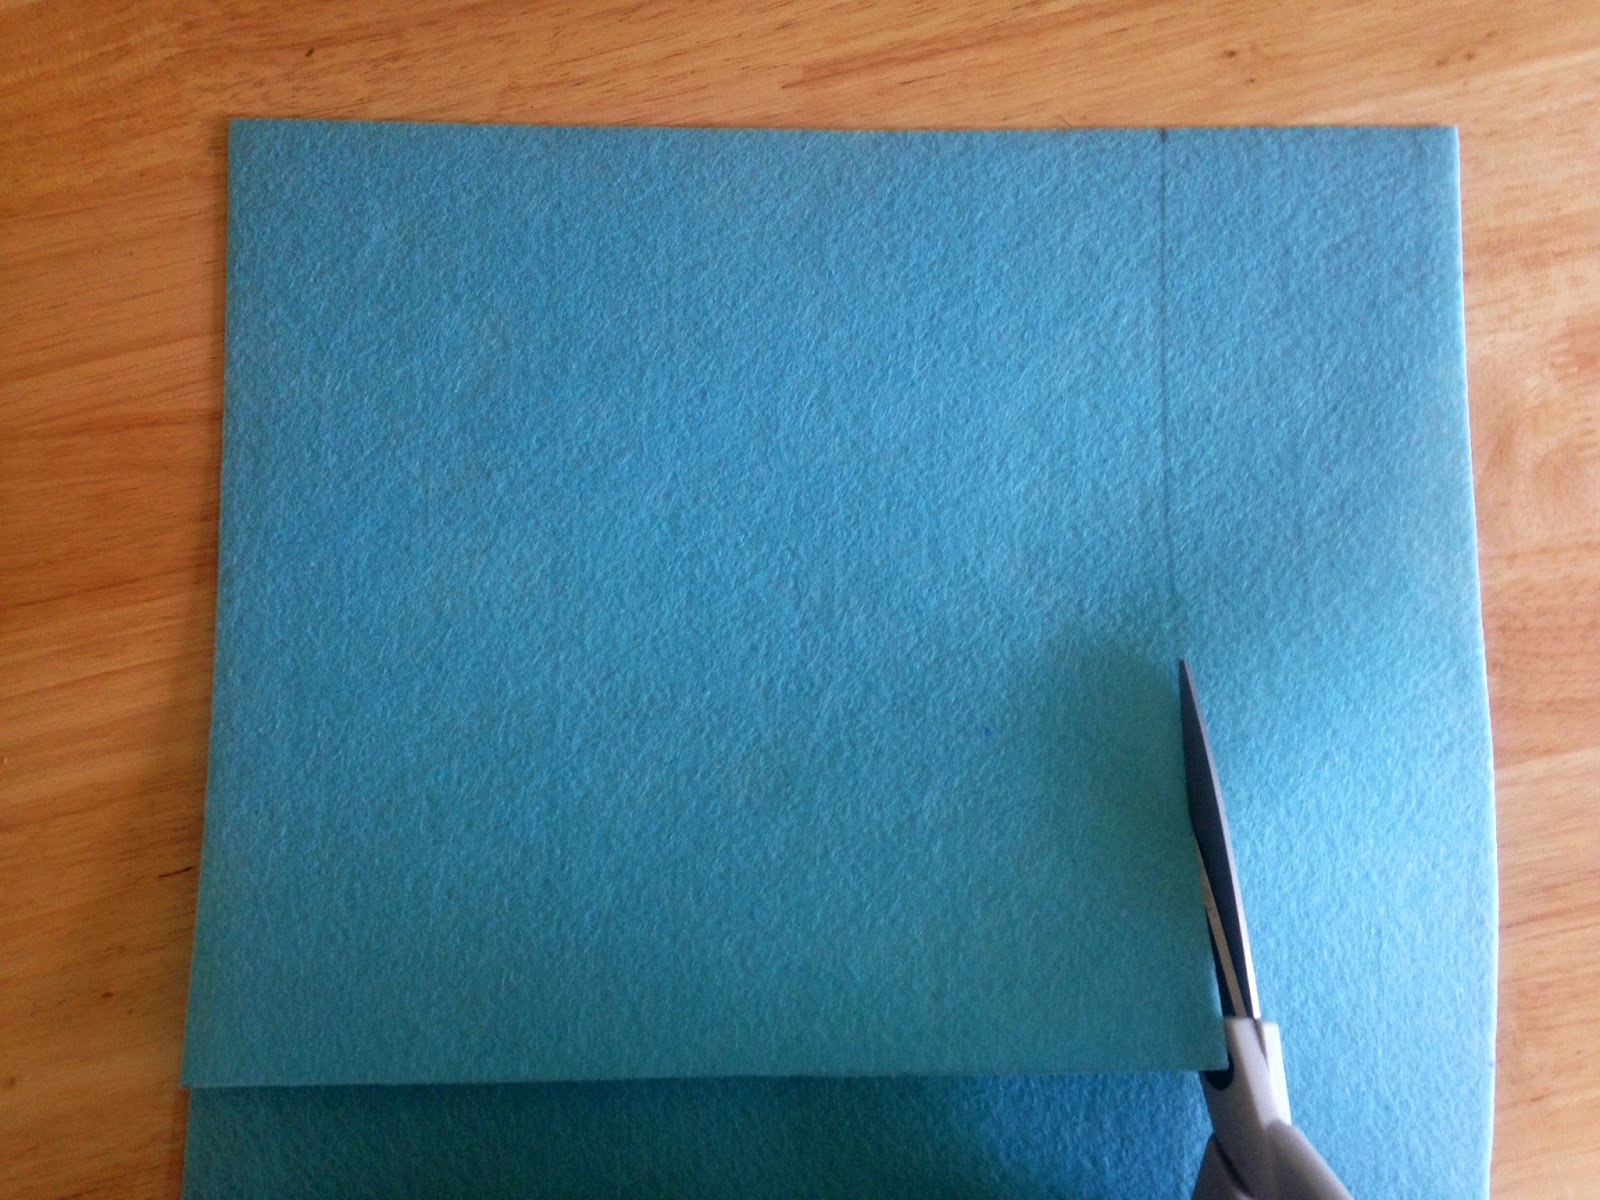 How To, How Hard, and How Much: How to Make a Felt Box